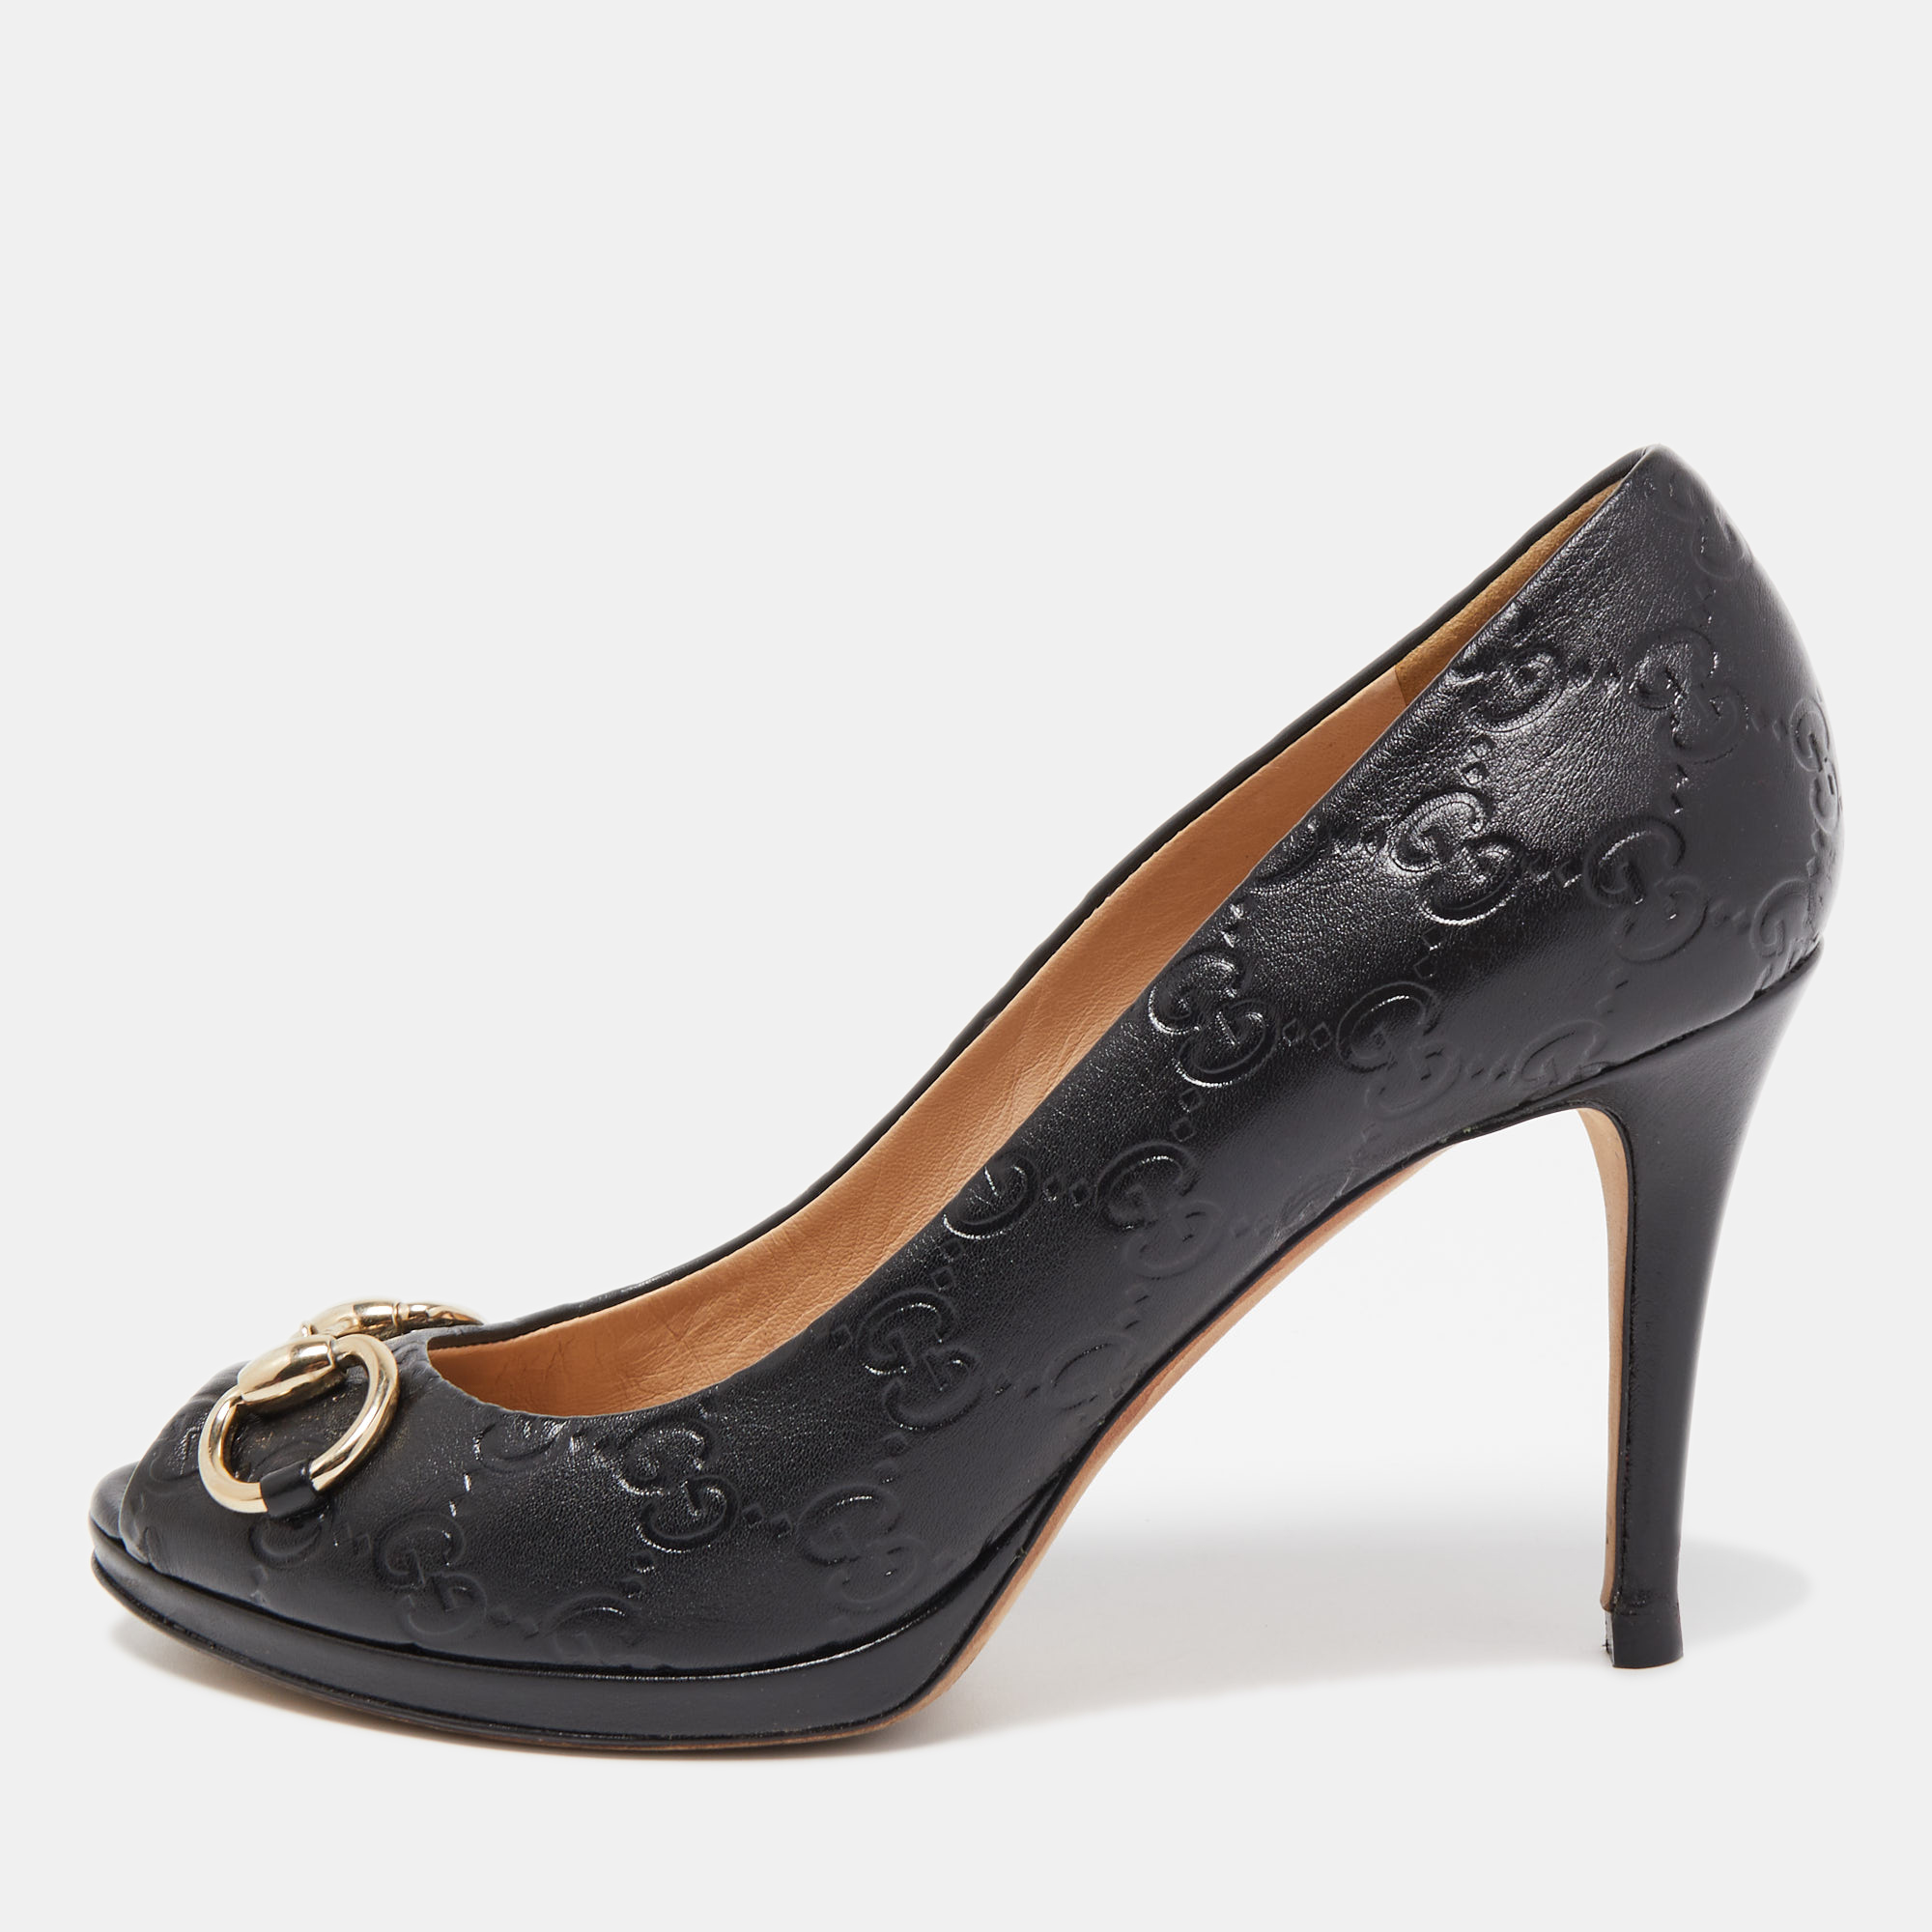 Gucci Black Guccissima Leather New Hollywood Pumps Size 38.5